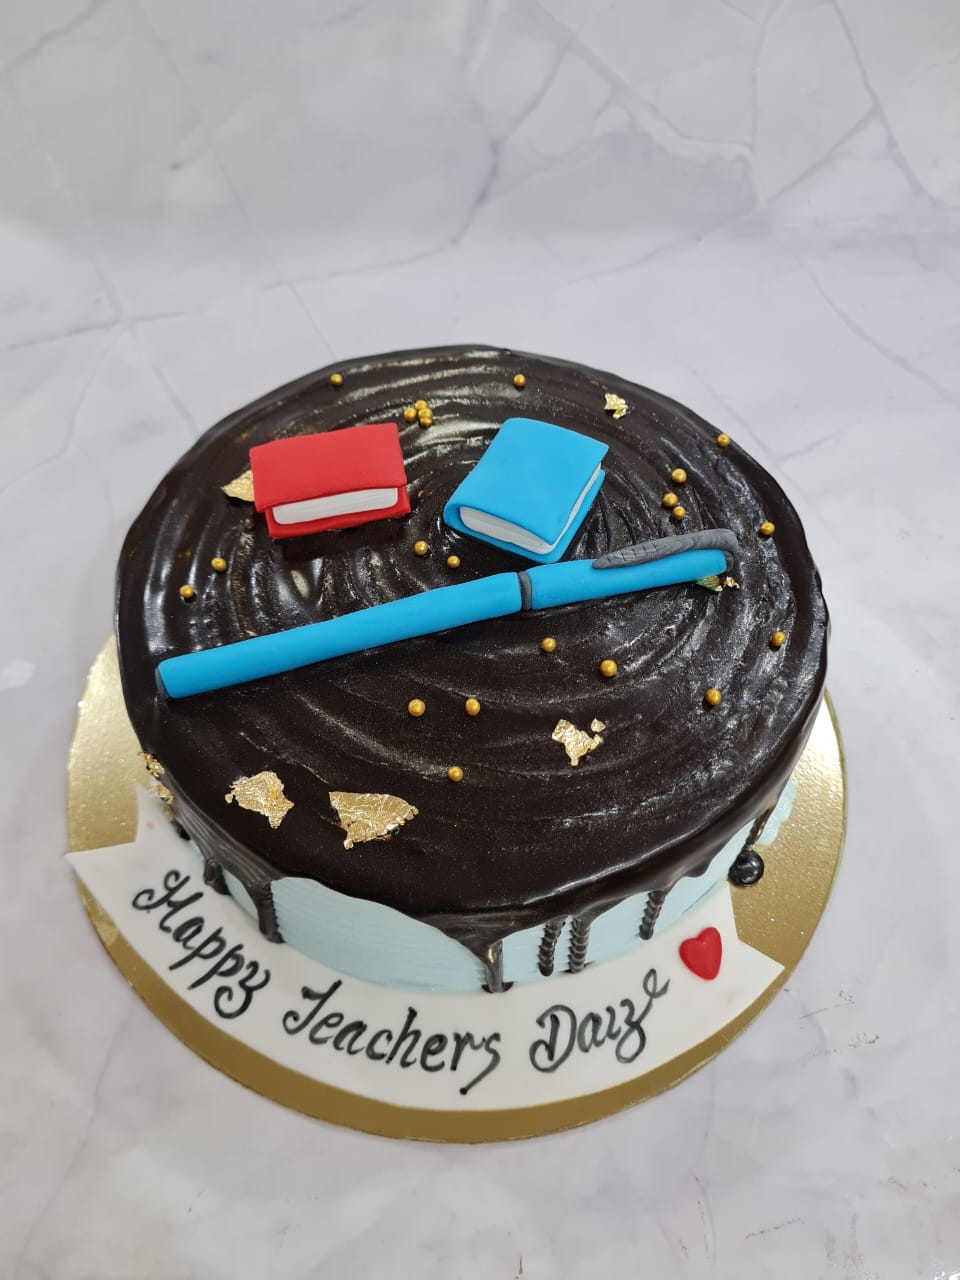 Teacher's Day Special Cake1, 24x7 Home delivery of Cake in New  Thippasandra, Banglore